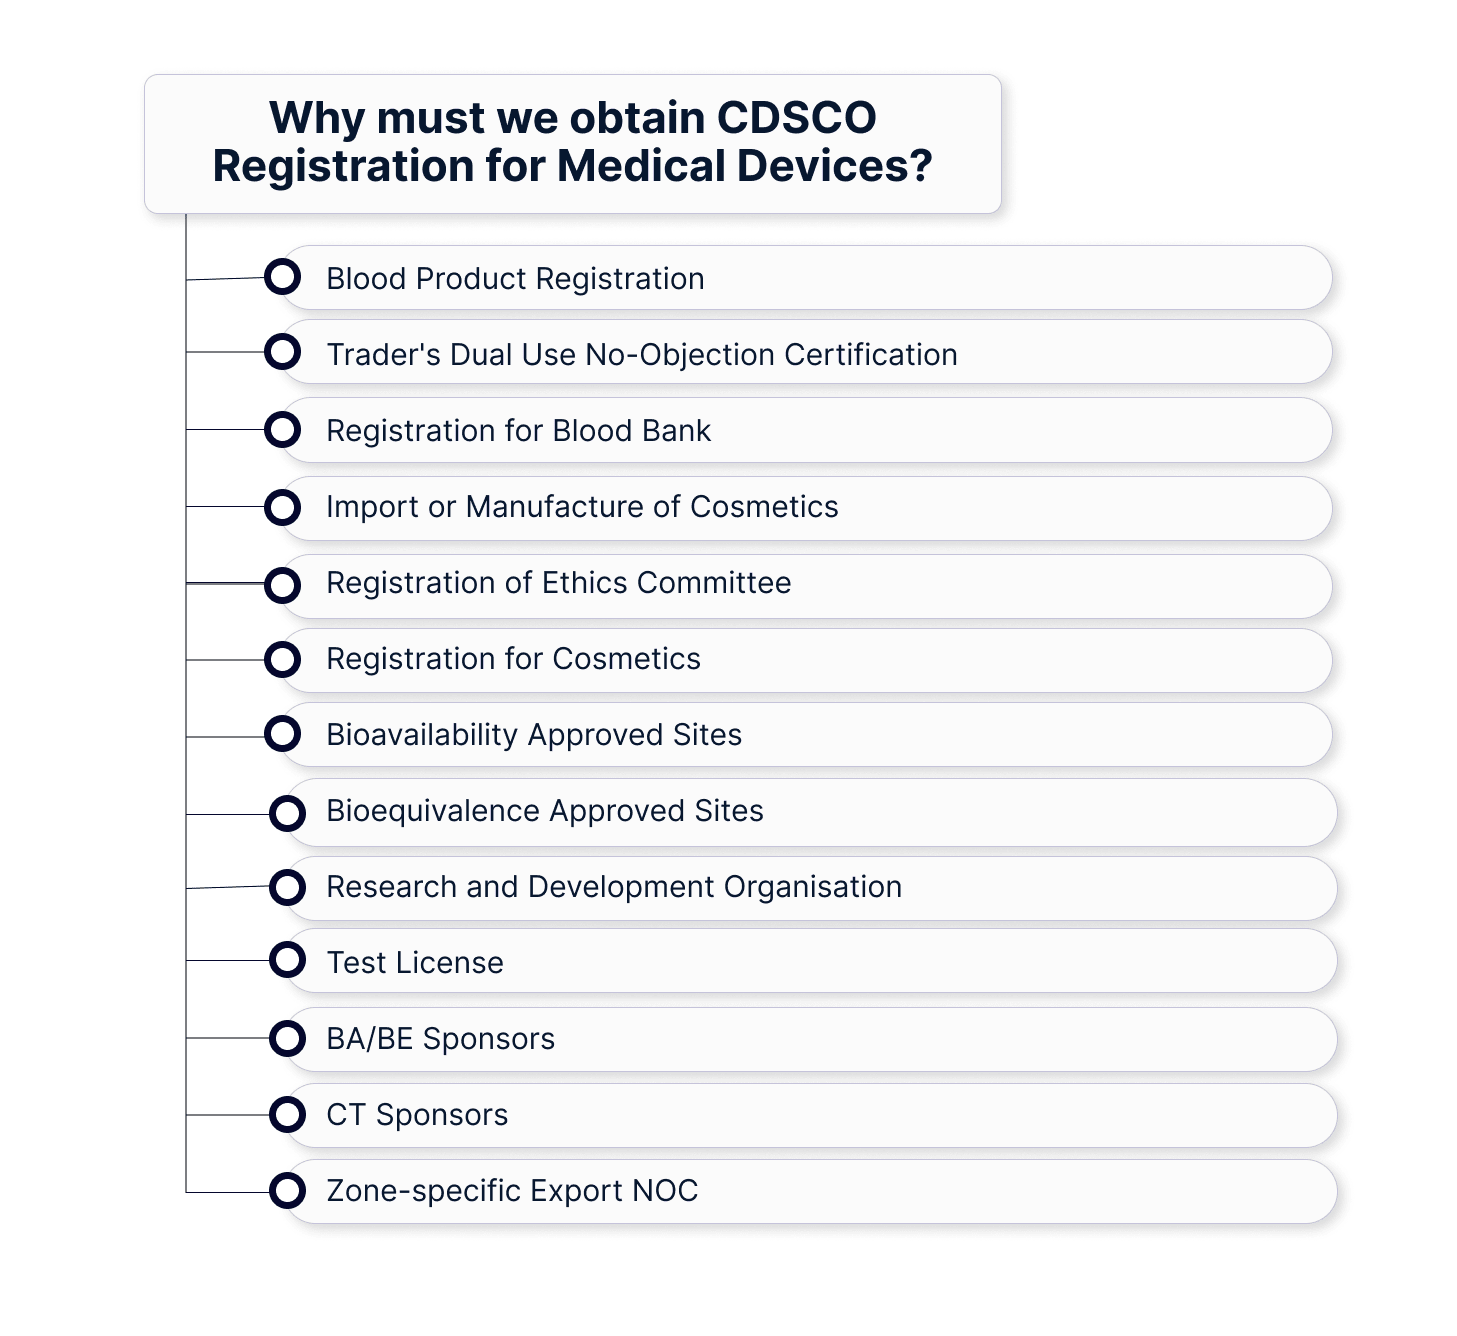 Why must we obtain CDSCO Registration for Medical Devices?